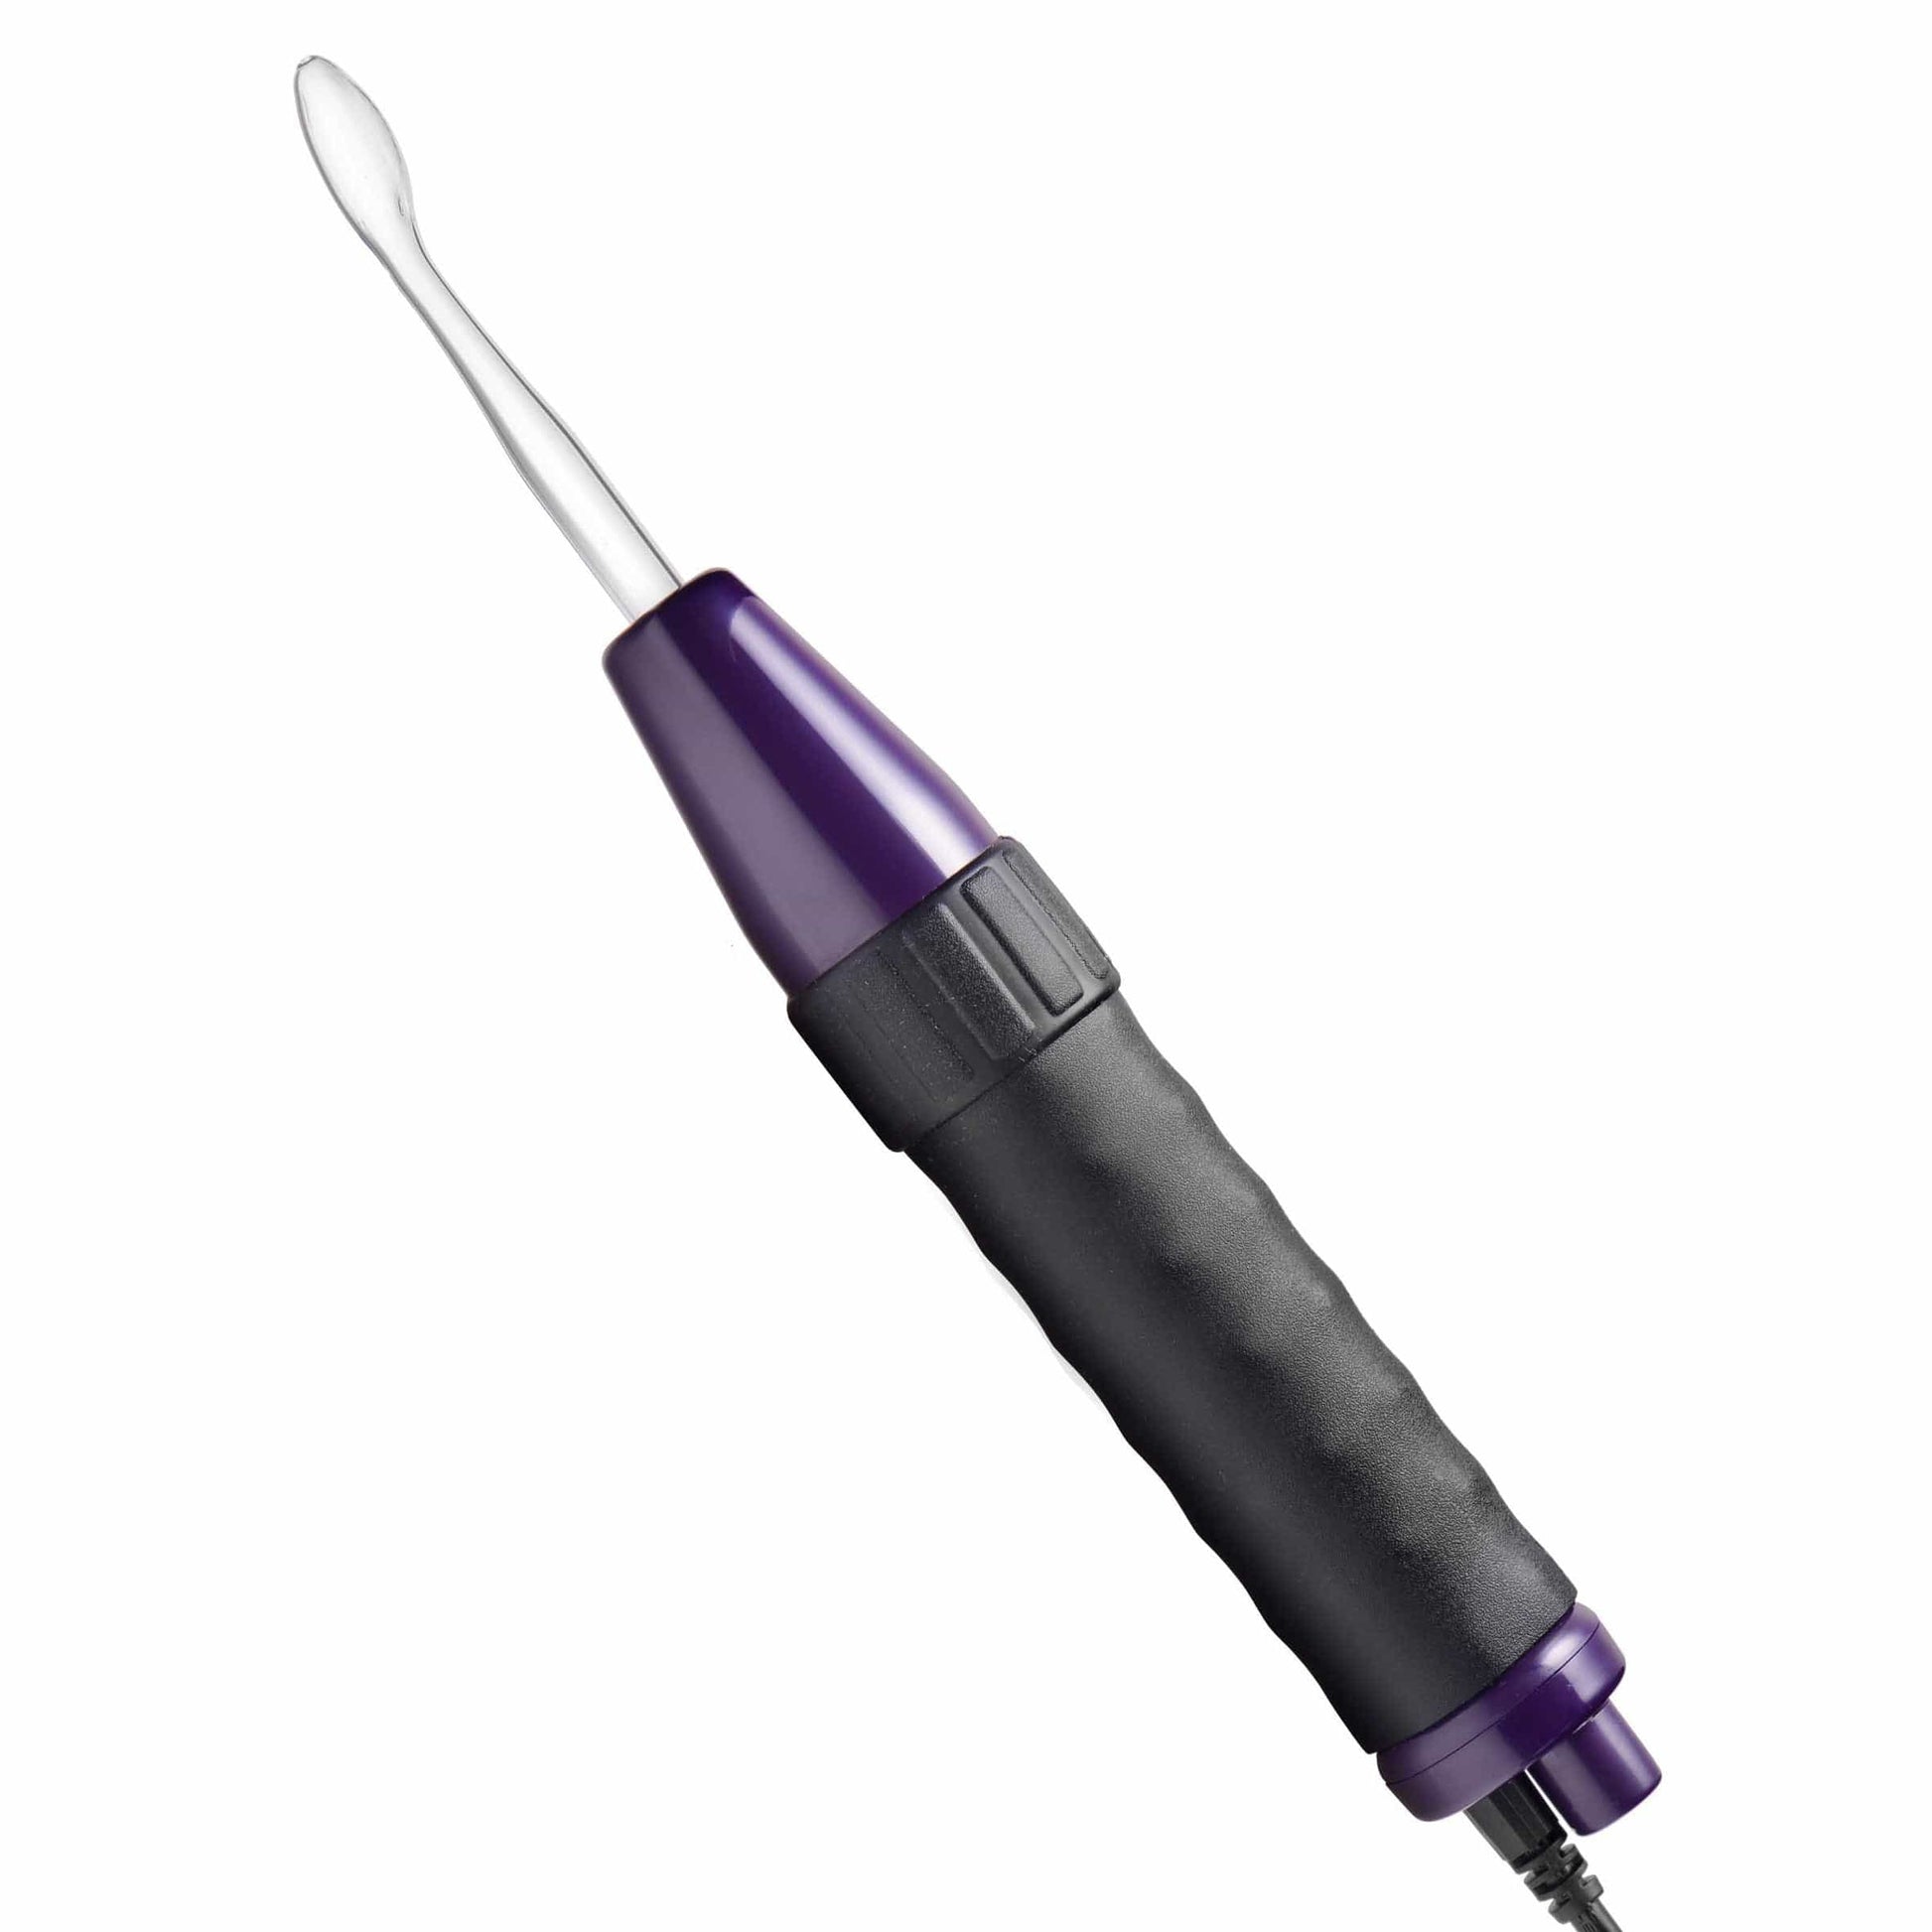 The $199 Violet Wand Kit™